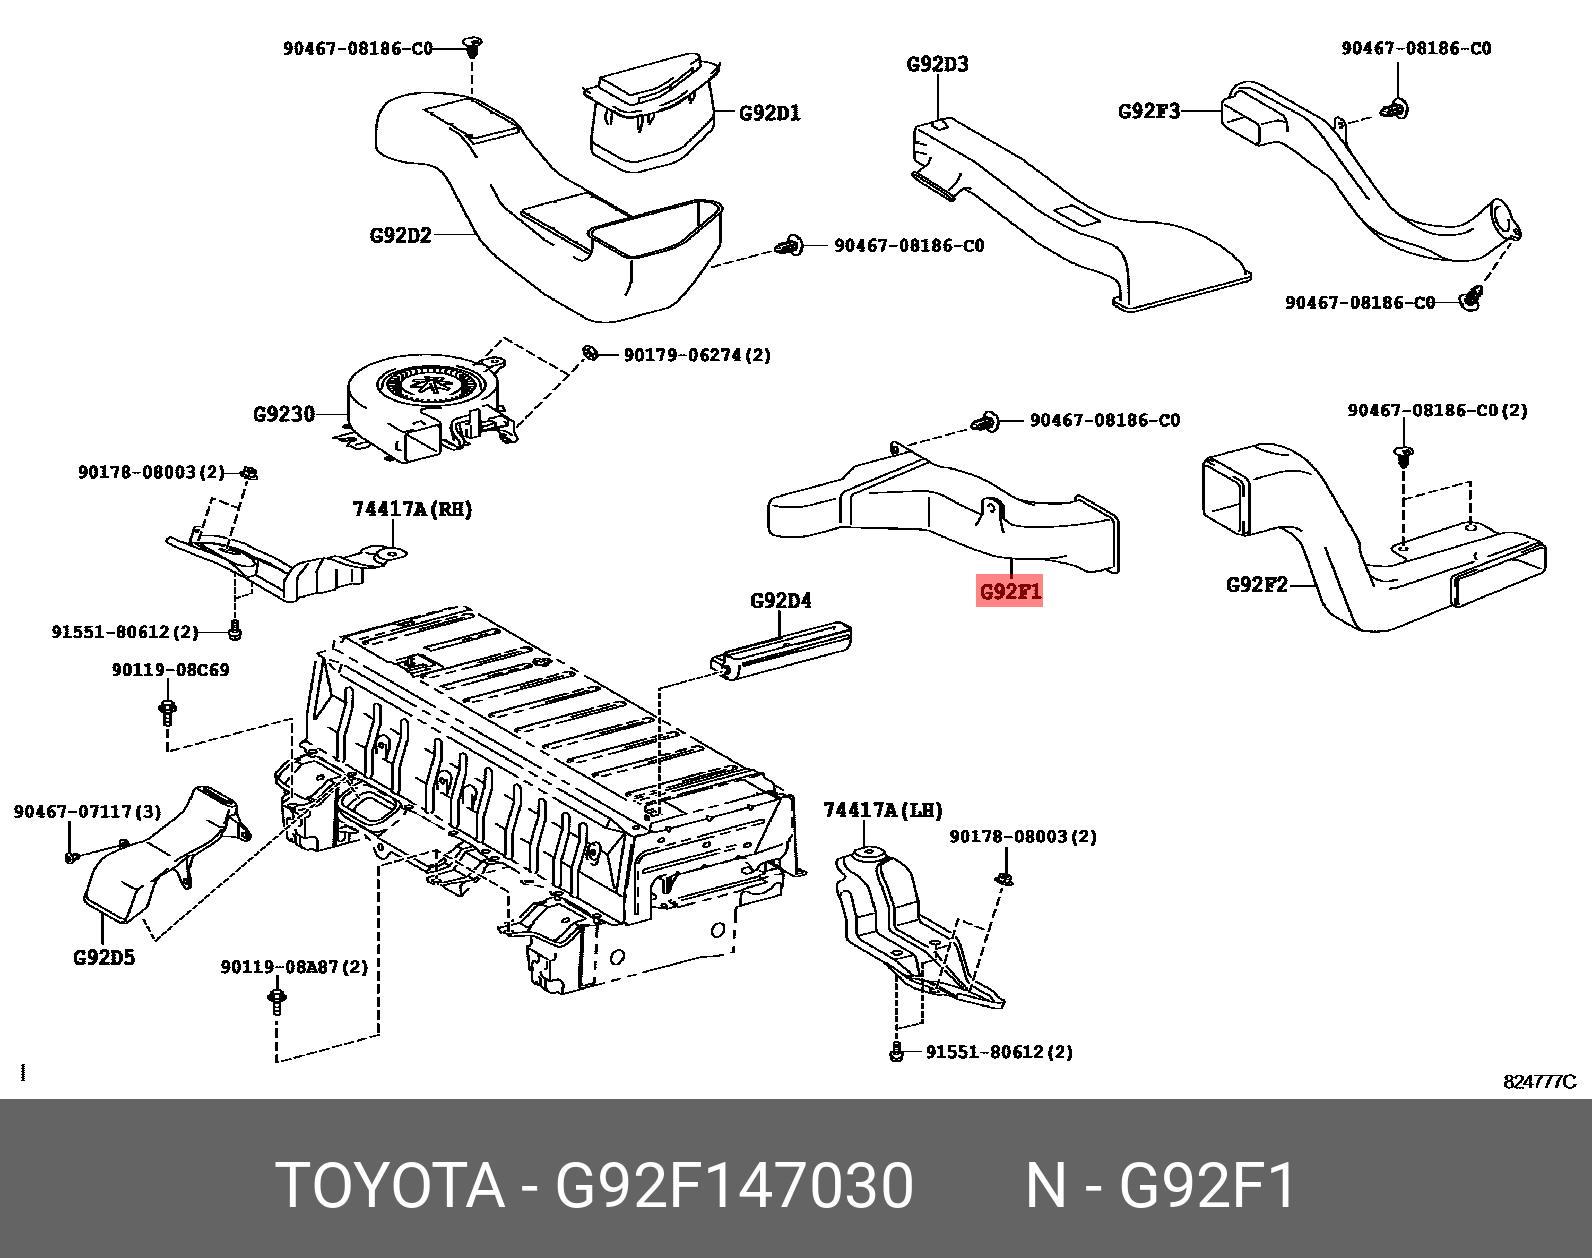 PRIUS (PLUG-IN HBD) 201201 - 201604, DUCT, HYBRID BATTERY EXHAUST, NO.1